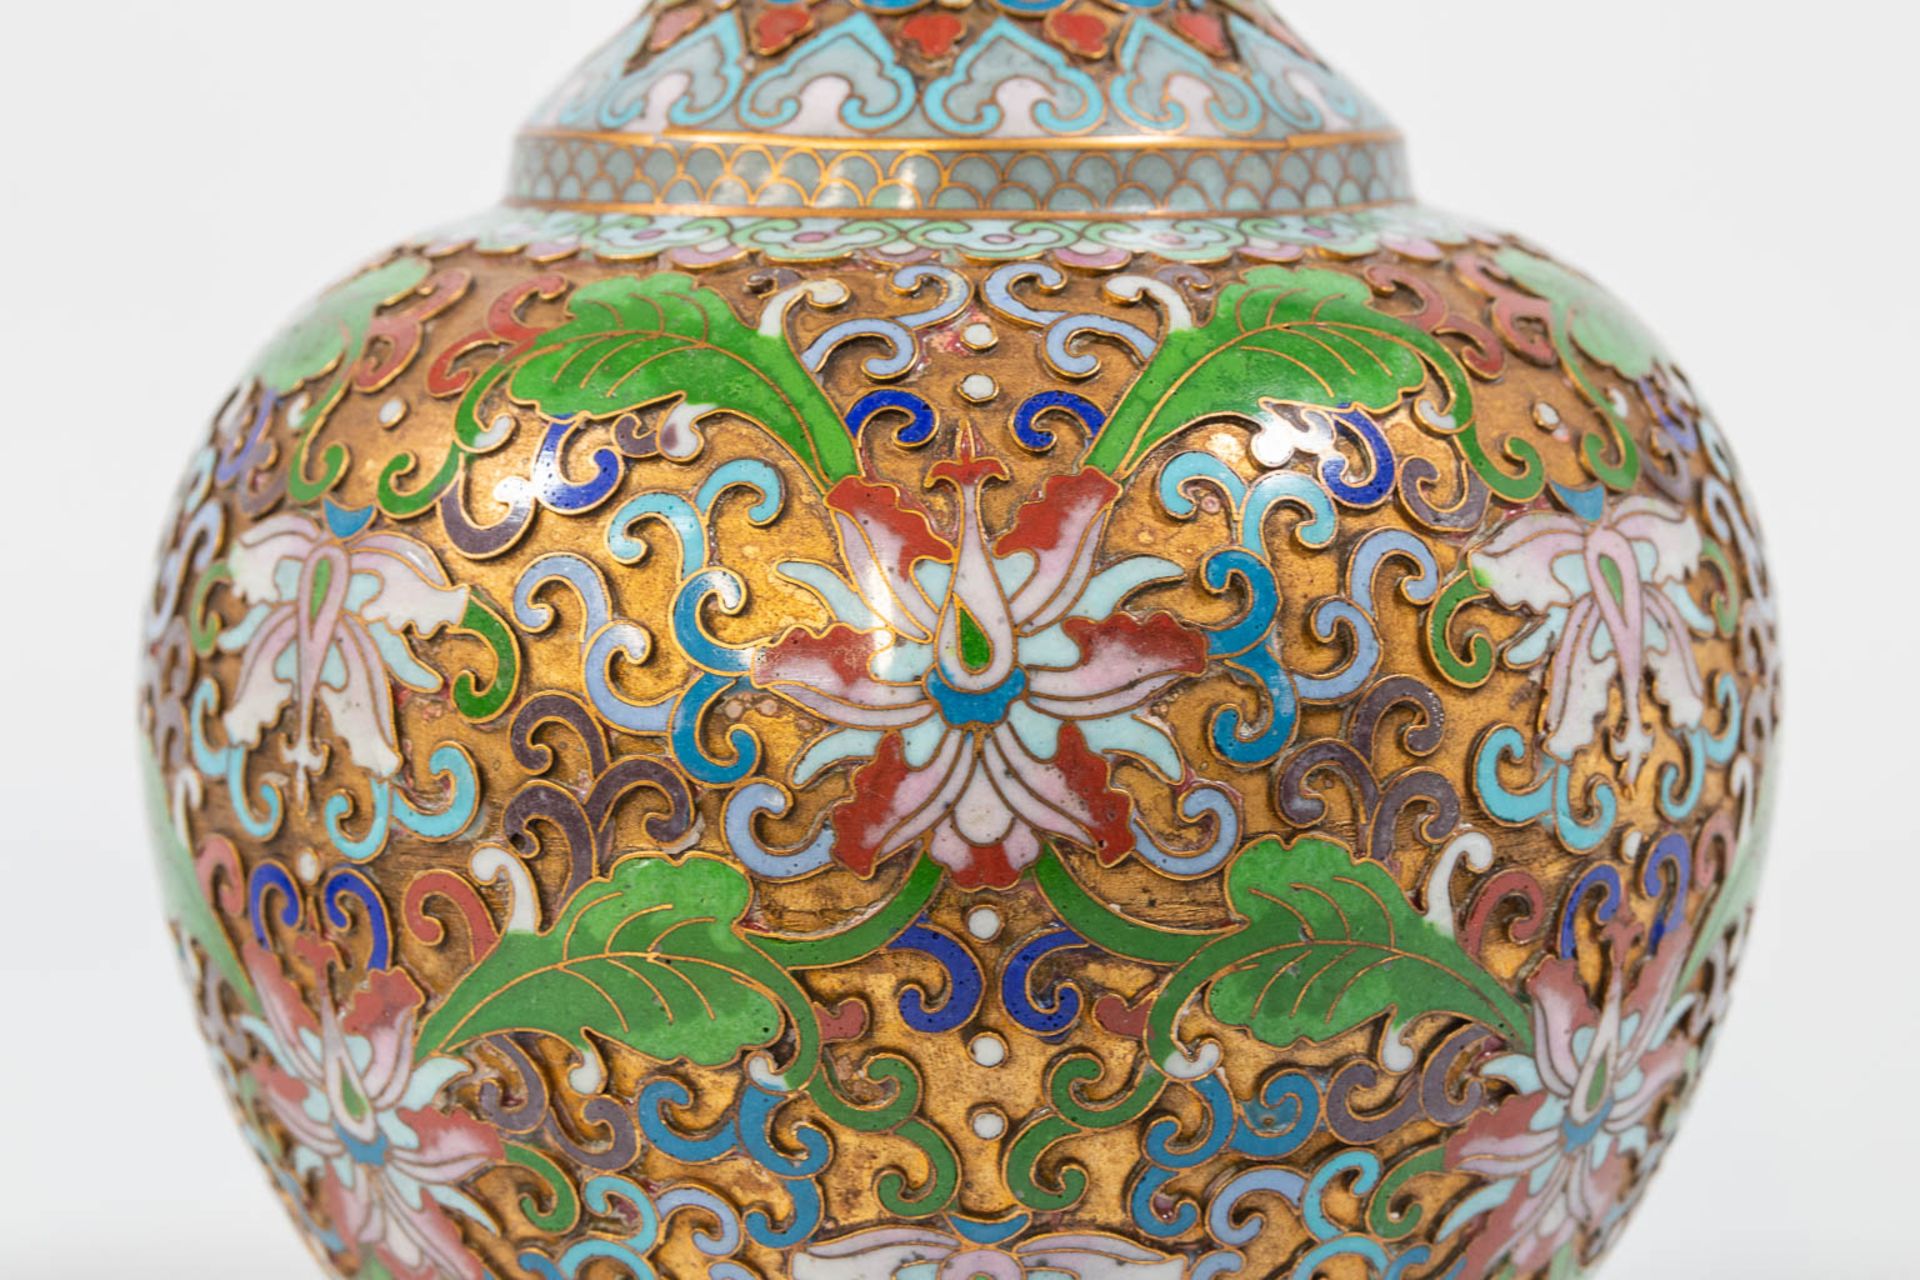 A pair of openworked Cloisonné vases, made of Bronze and enamel. - Image 17 of 17